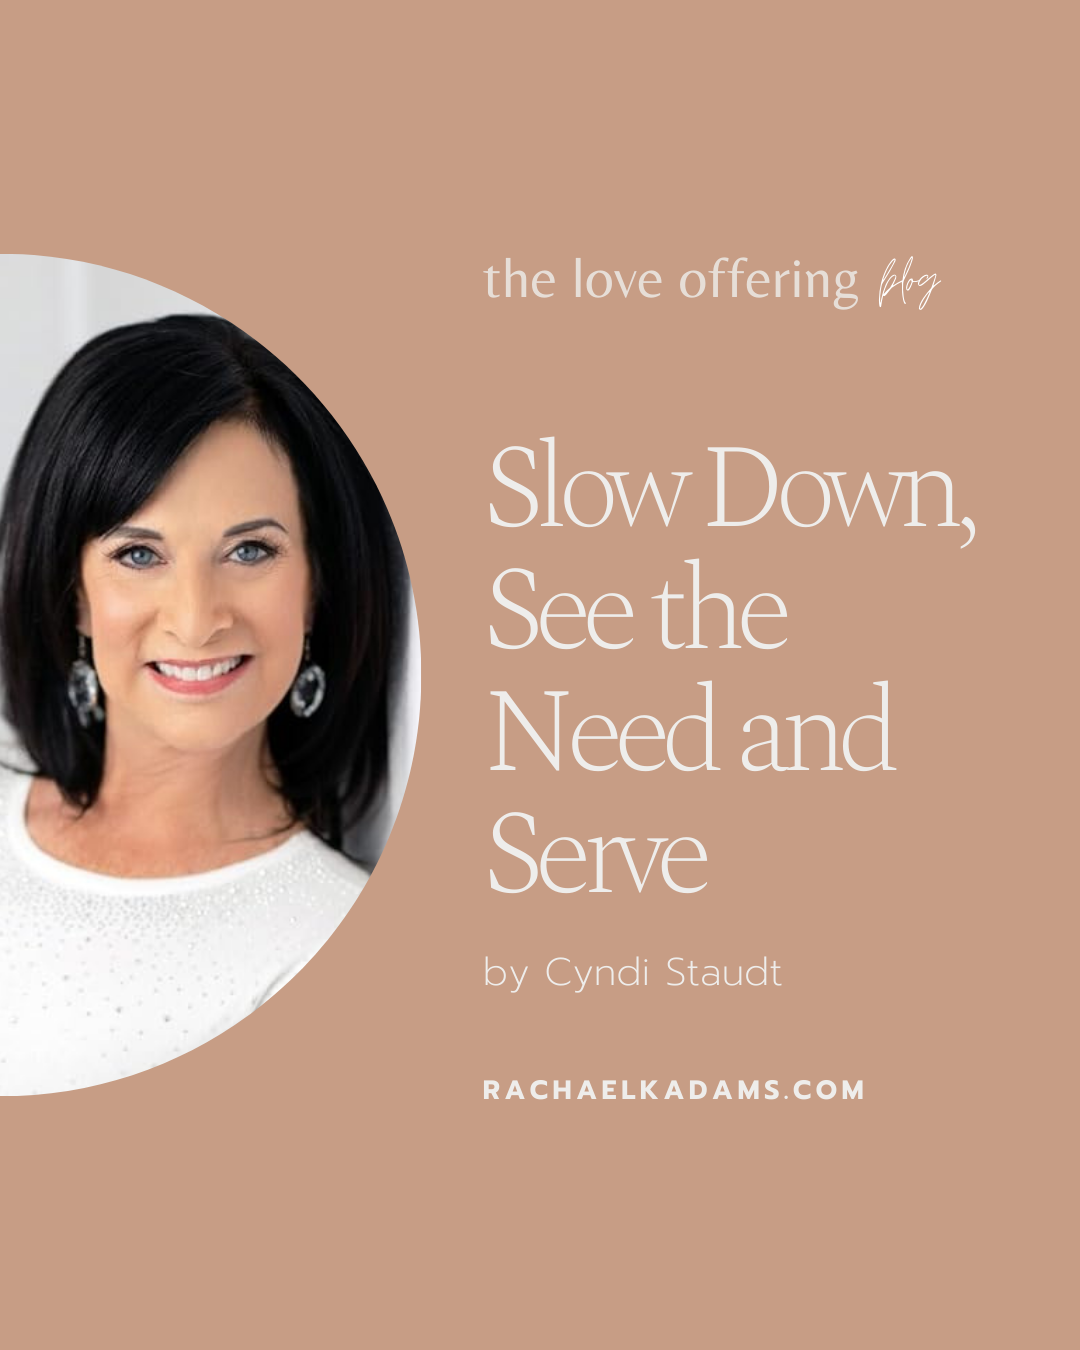 Slow Down, See the Need, and Serve by Cyndi Staudt